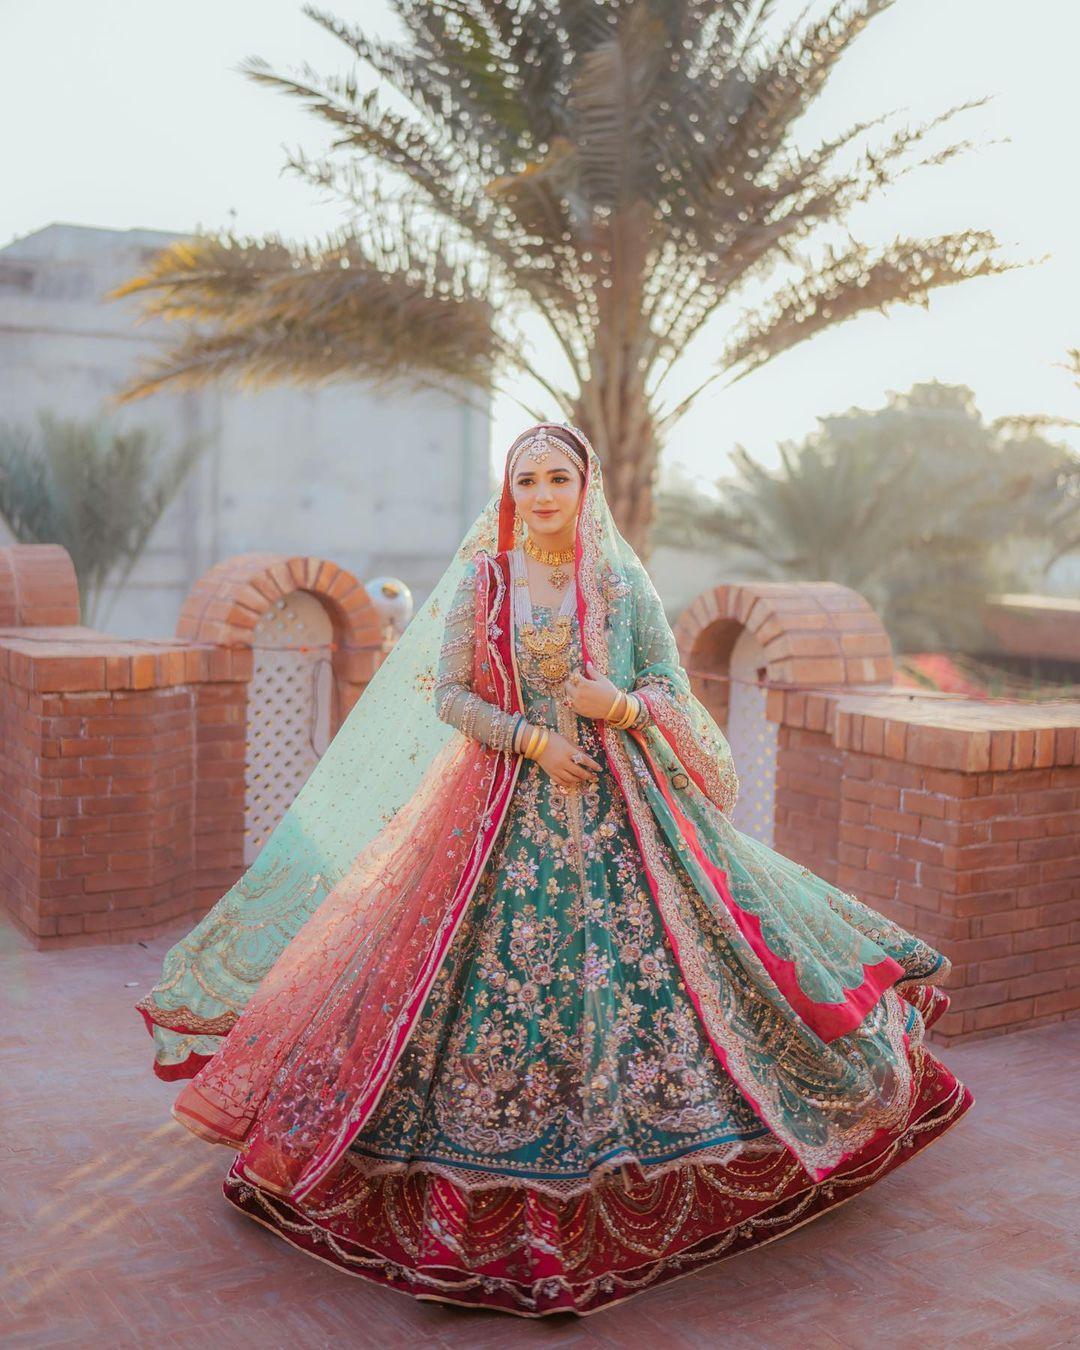 Indian Bridal Wear Shopping Guide: Best Fashion Designers, Jewellers and  More in Delhi | Vogue India